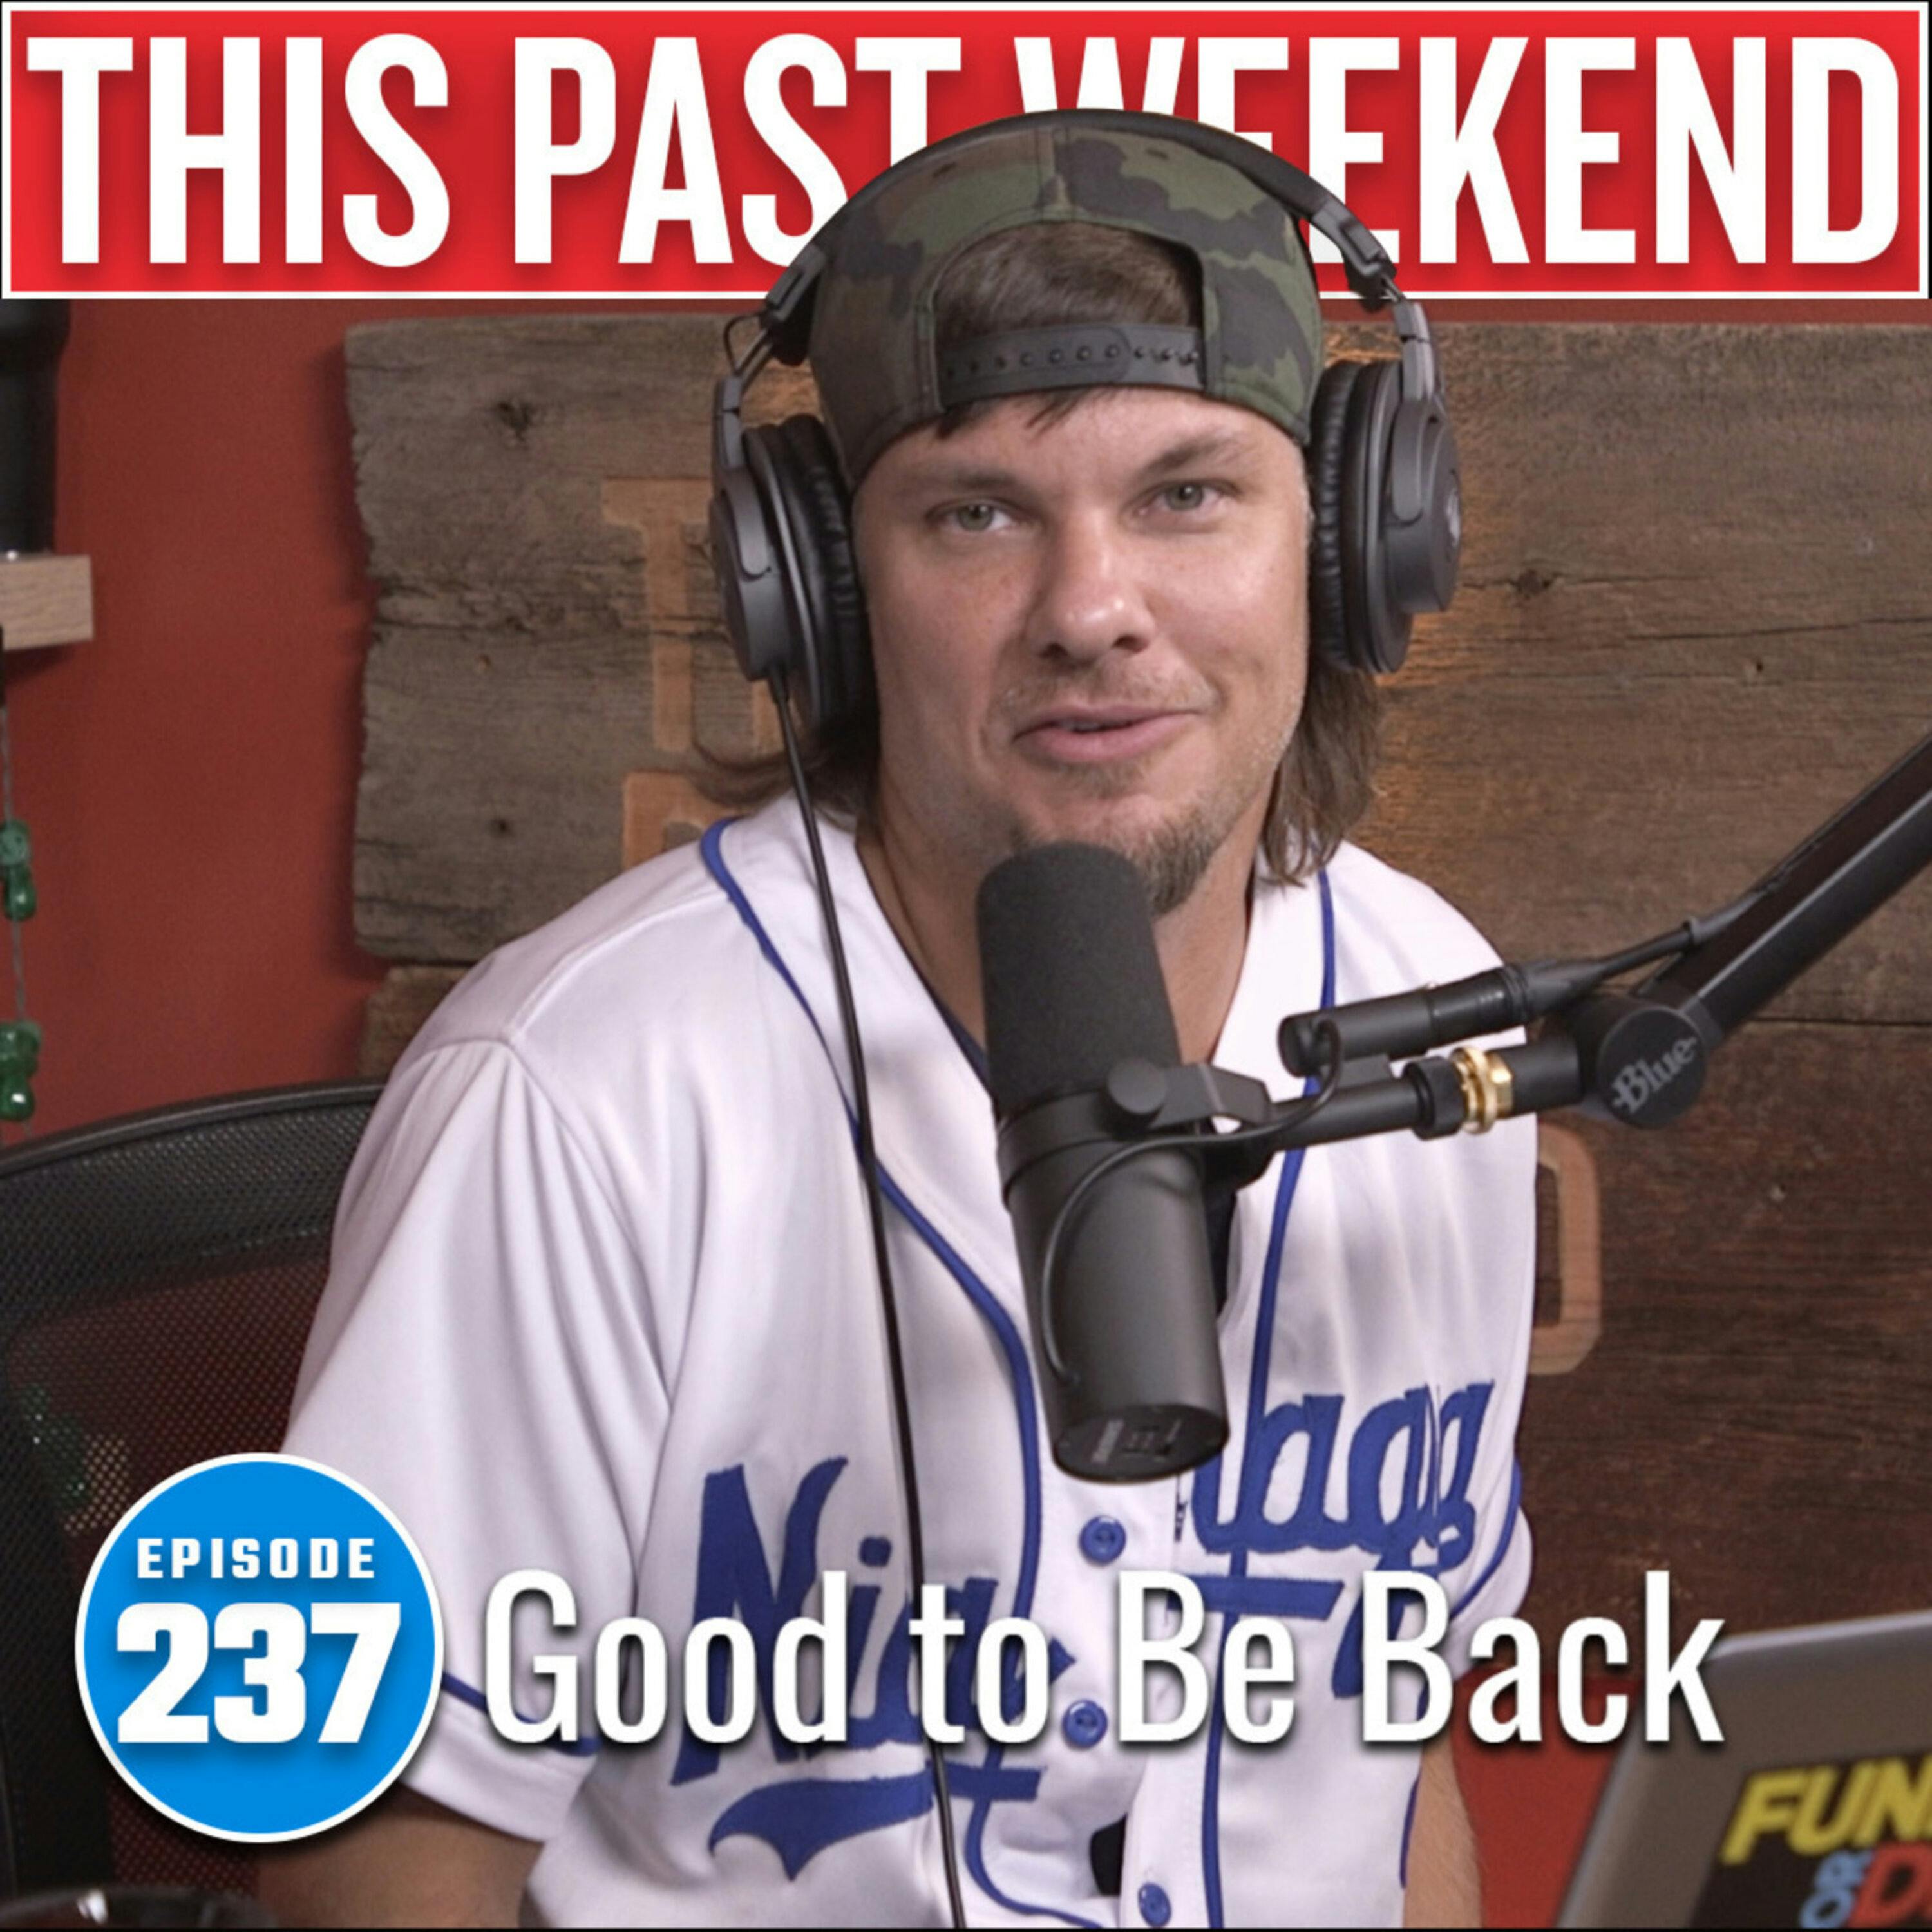 Good to Be Back | This Past Weekend #237 by Theo Von